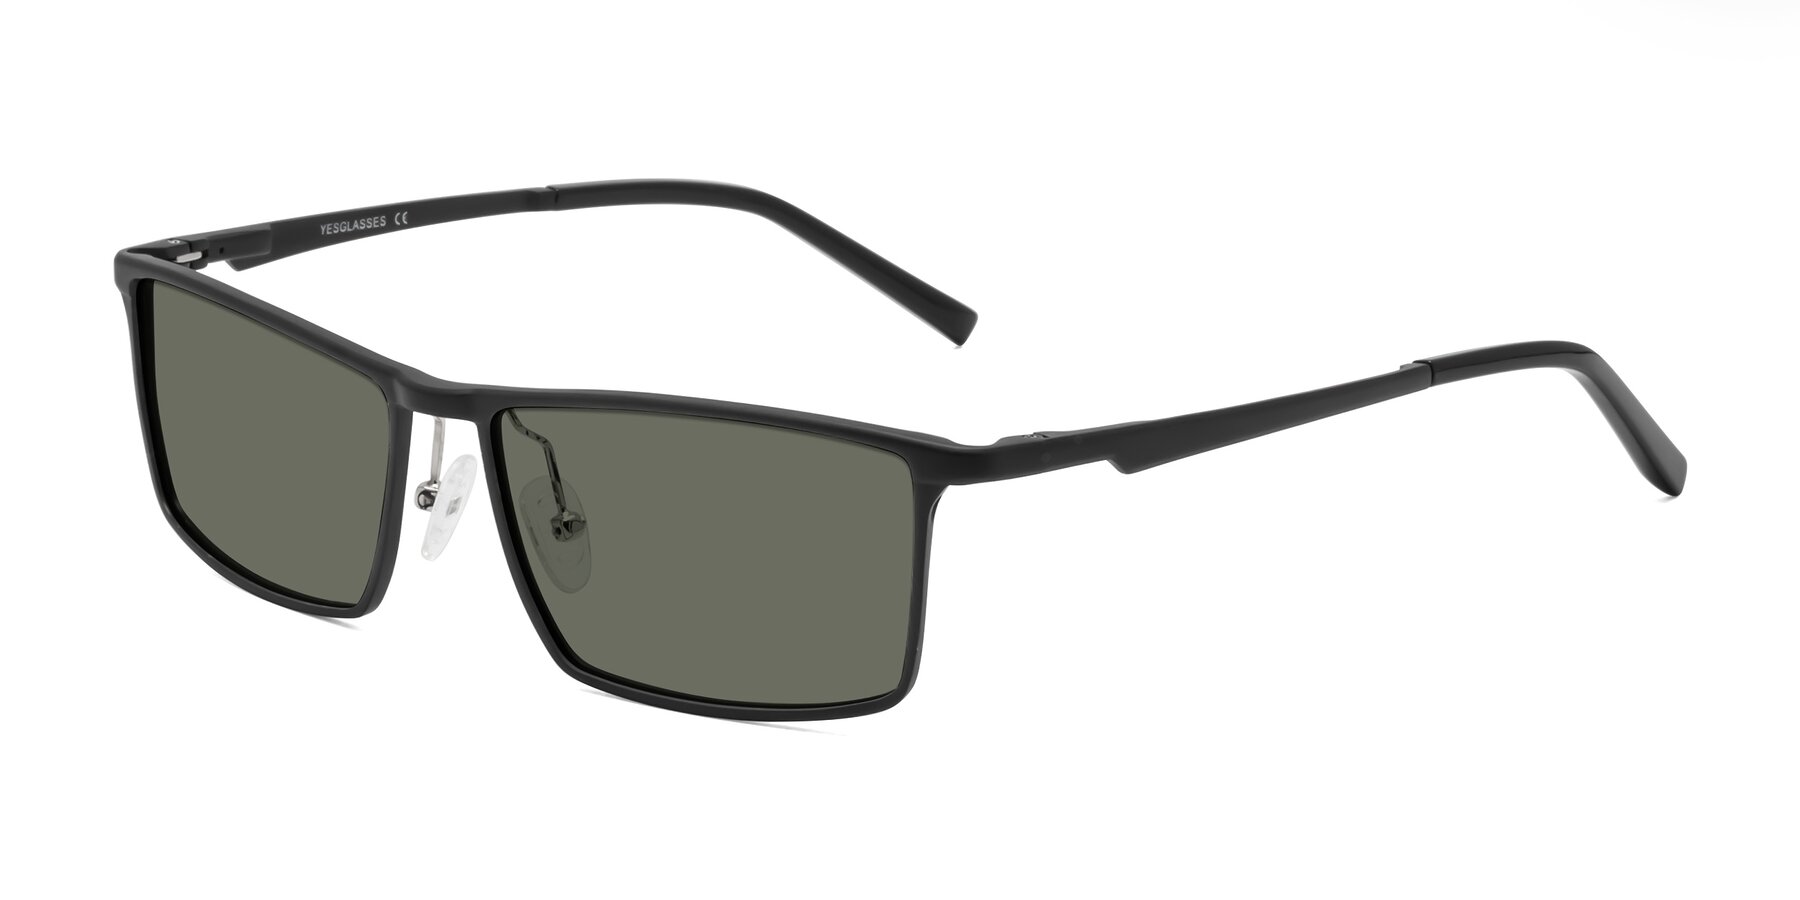 Angle of CX6330 in Black with Gray Polarized Lenses